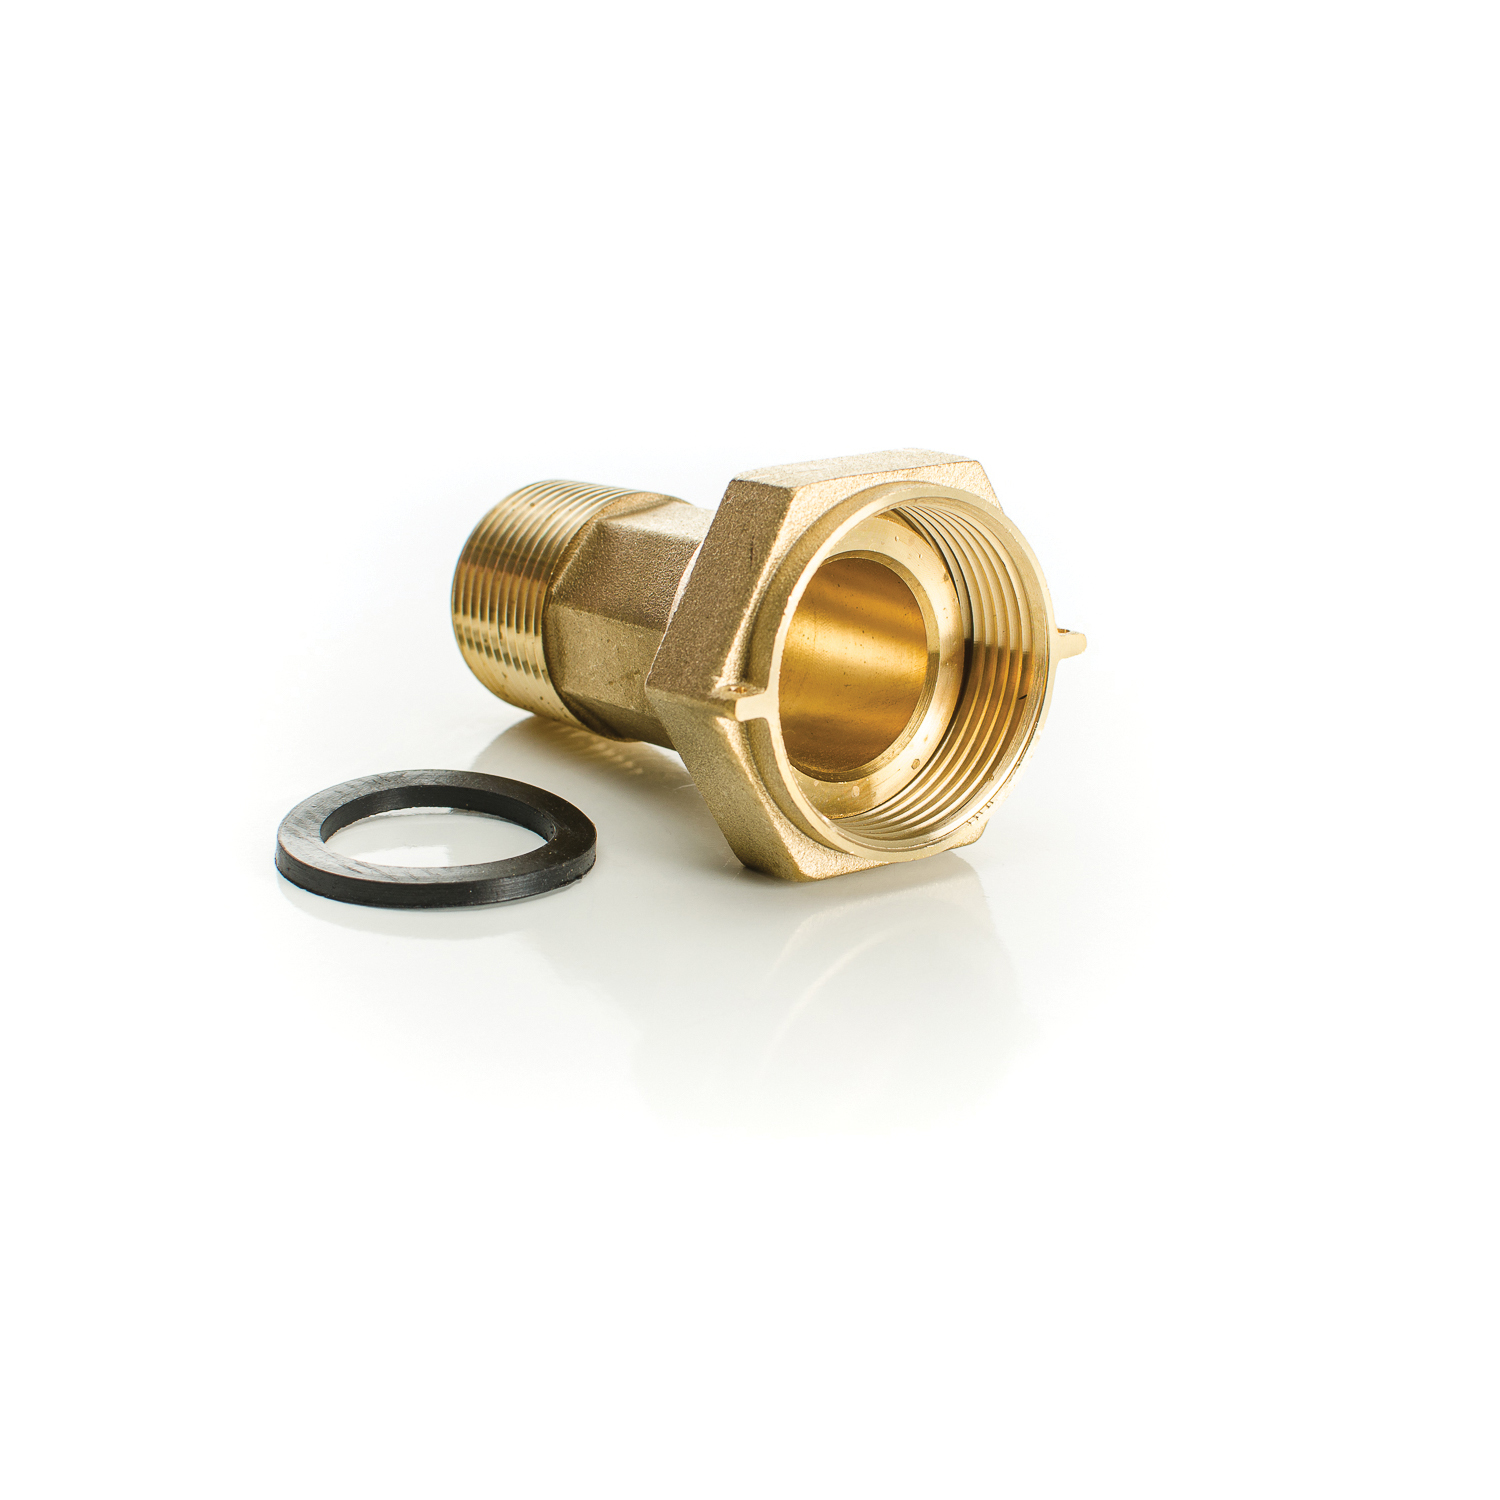 PASCO 7602 Water Meter Coupling With Washer, 1-1/4 x 1 in Nominal, MNPT x FNPT End Style, Brass